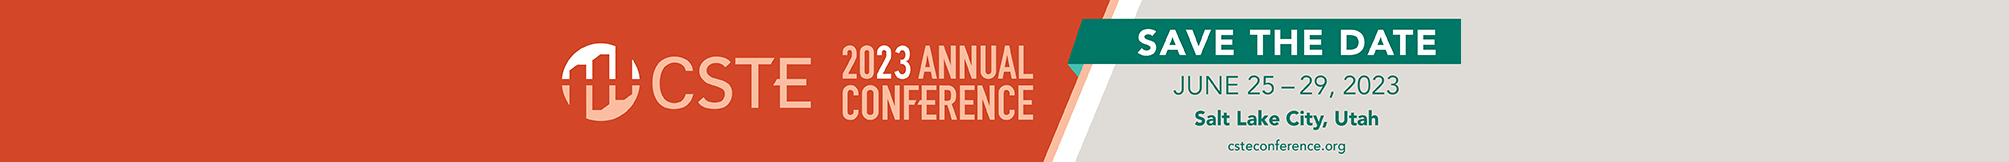 2023 CSTE Annual Conference | Save The Date | June 25 - 29th | Salt Lake City, Utah